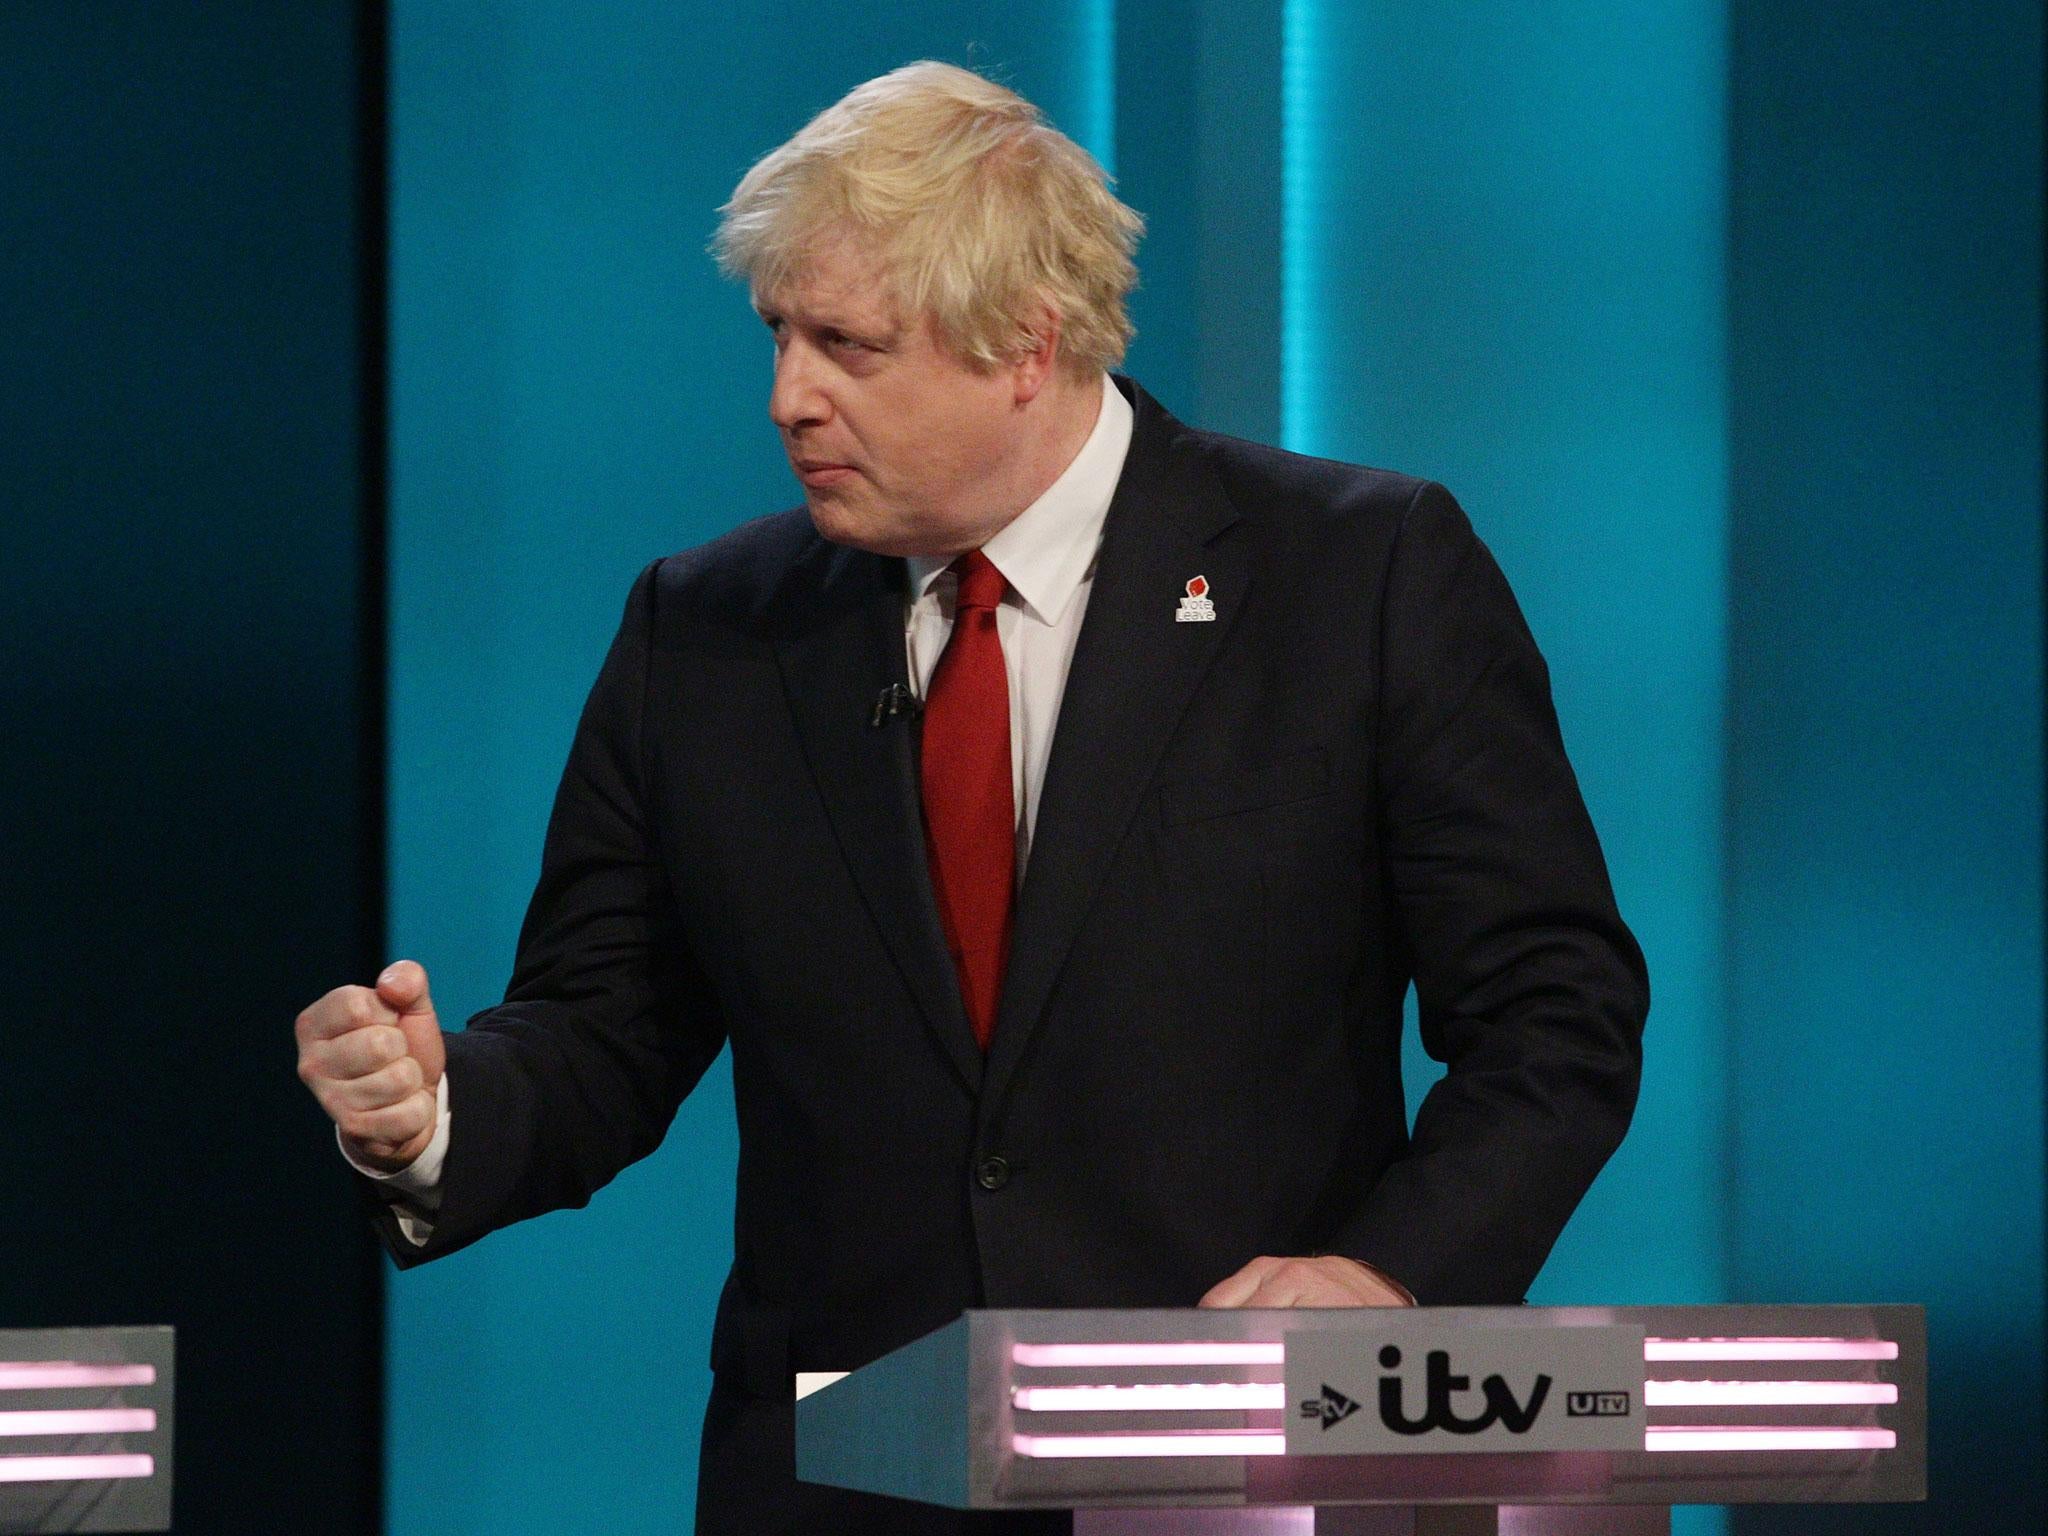 Eu Referendum Itv Debate Johnson Clashes With Remain Camp Over £350m Figure As It Happened